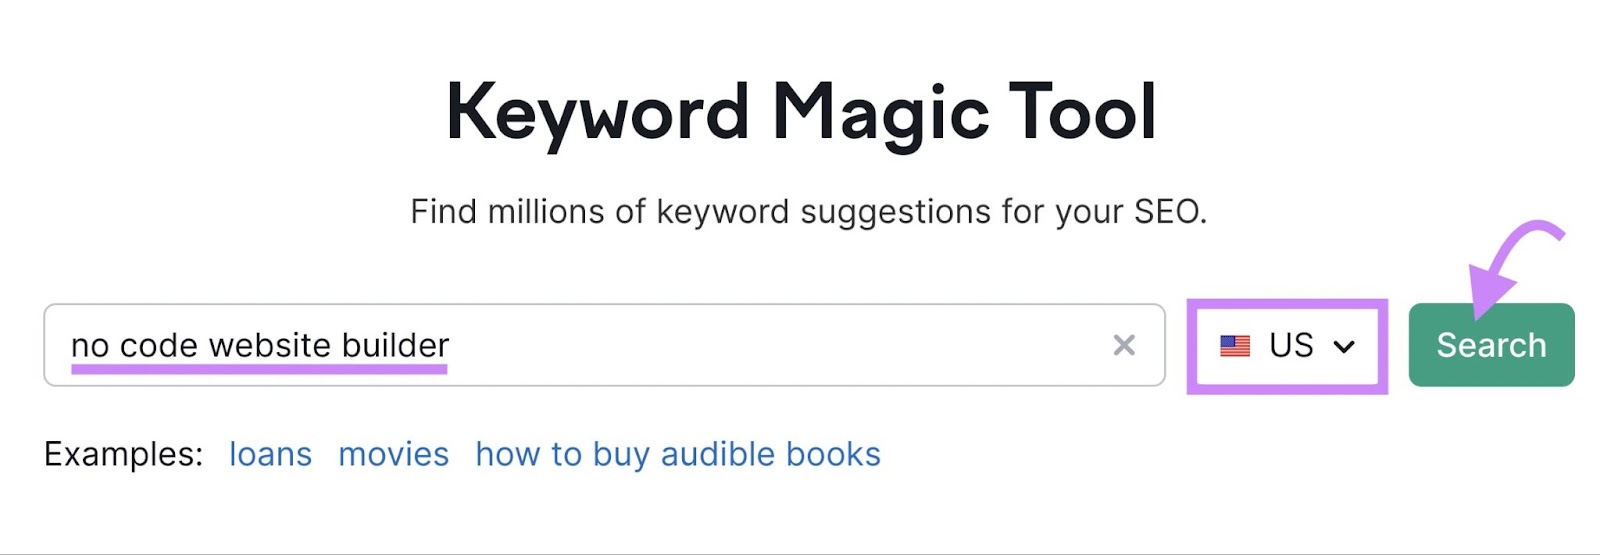 "no code website builder" entered into the Keyword Magic Tool search bar